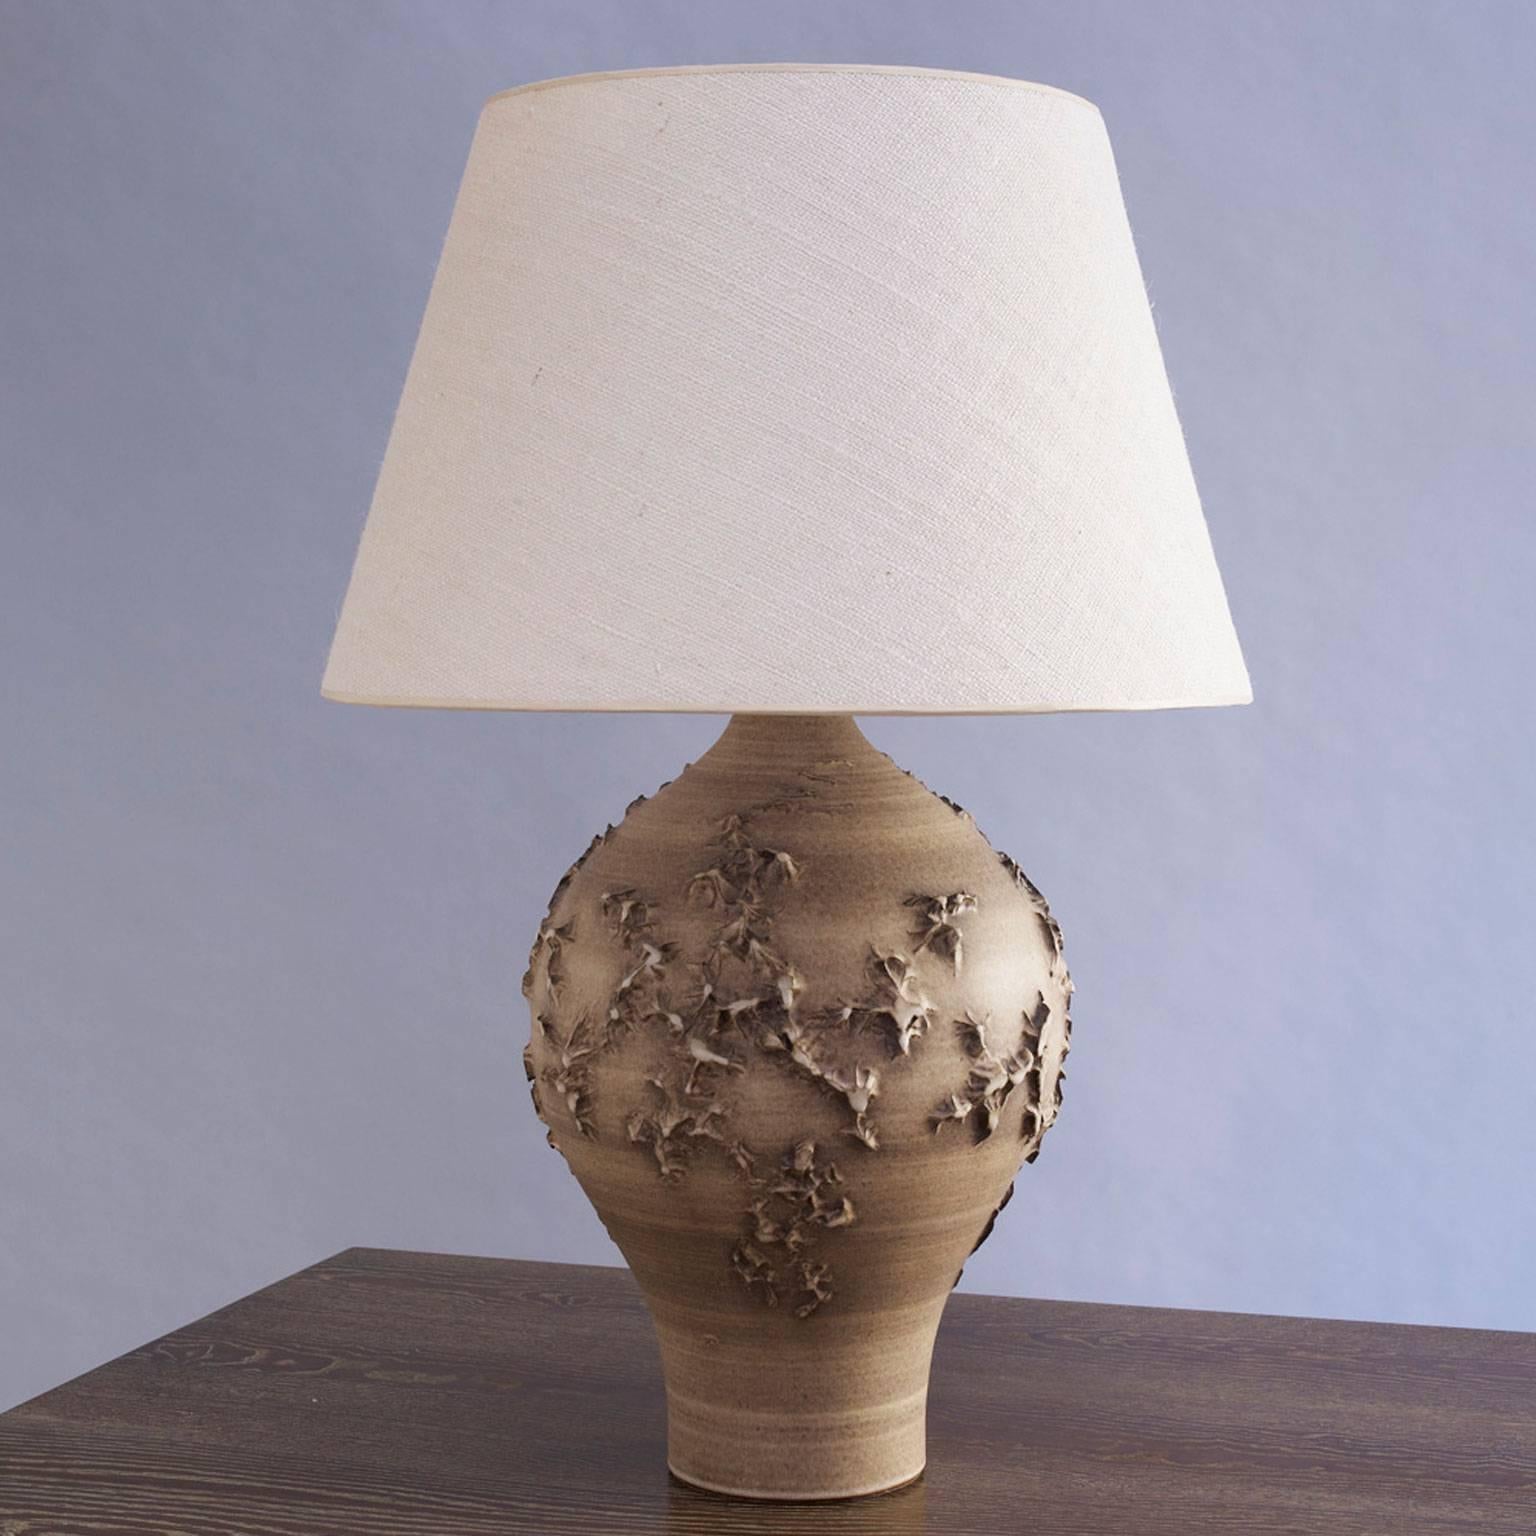 Design Technics
Ceramic lamp with applied decoration
in matte chesnut glaze.
Signed with DT mark.
American, circa 1950.